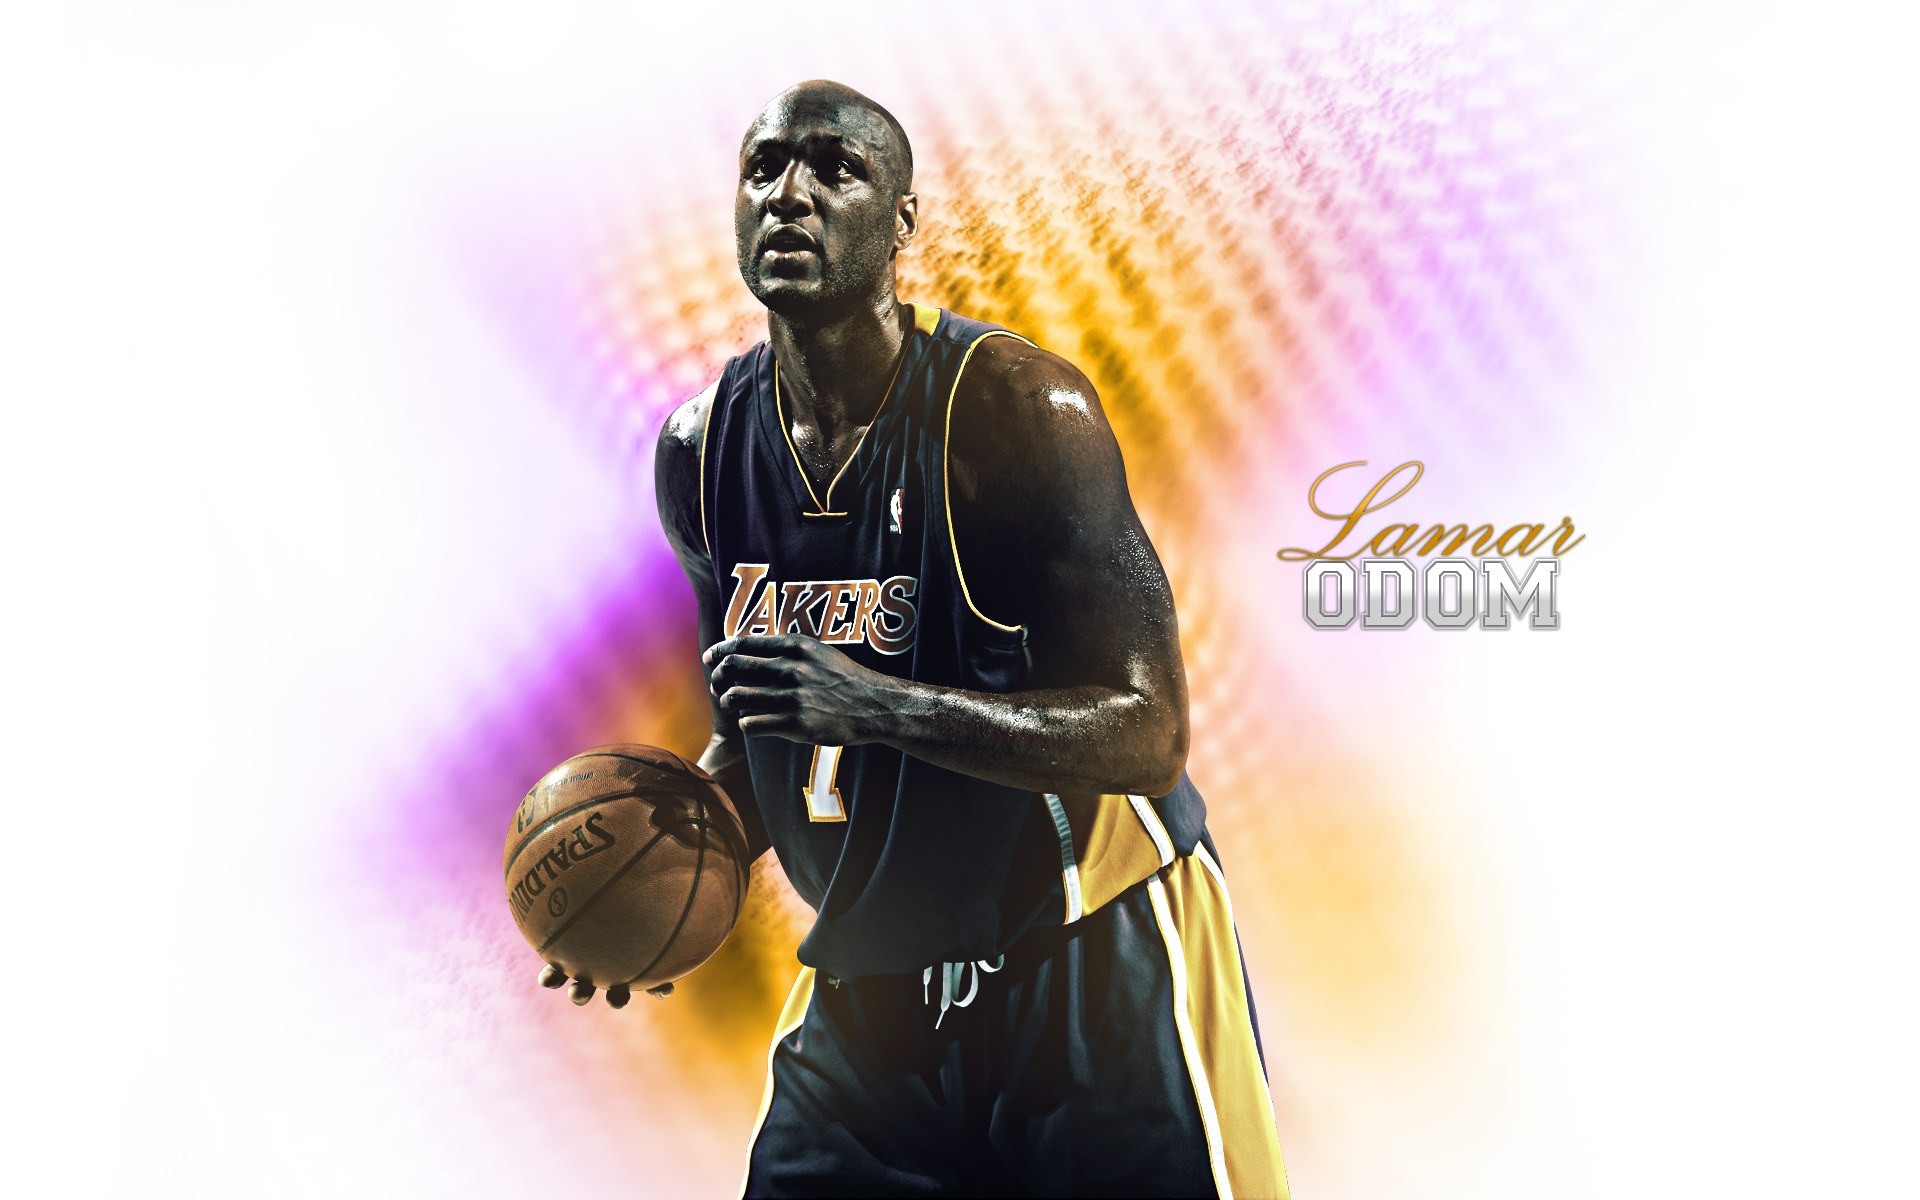 Los Angeles Lakers Wallpaper Oficial #17 - 1920x1200